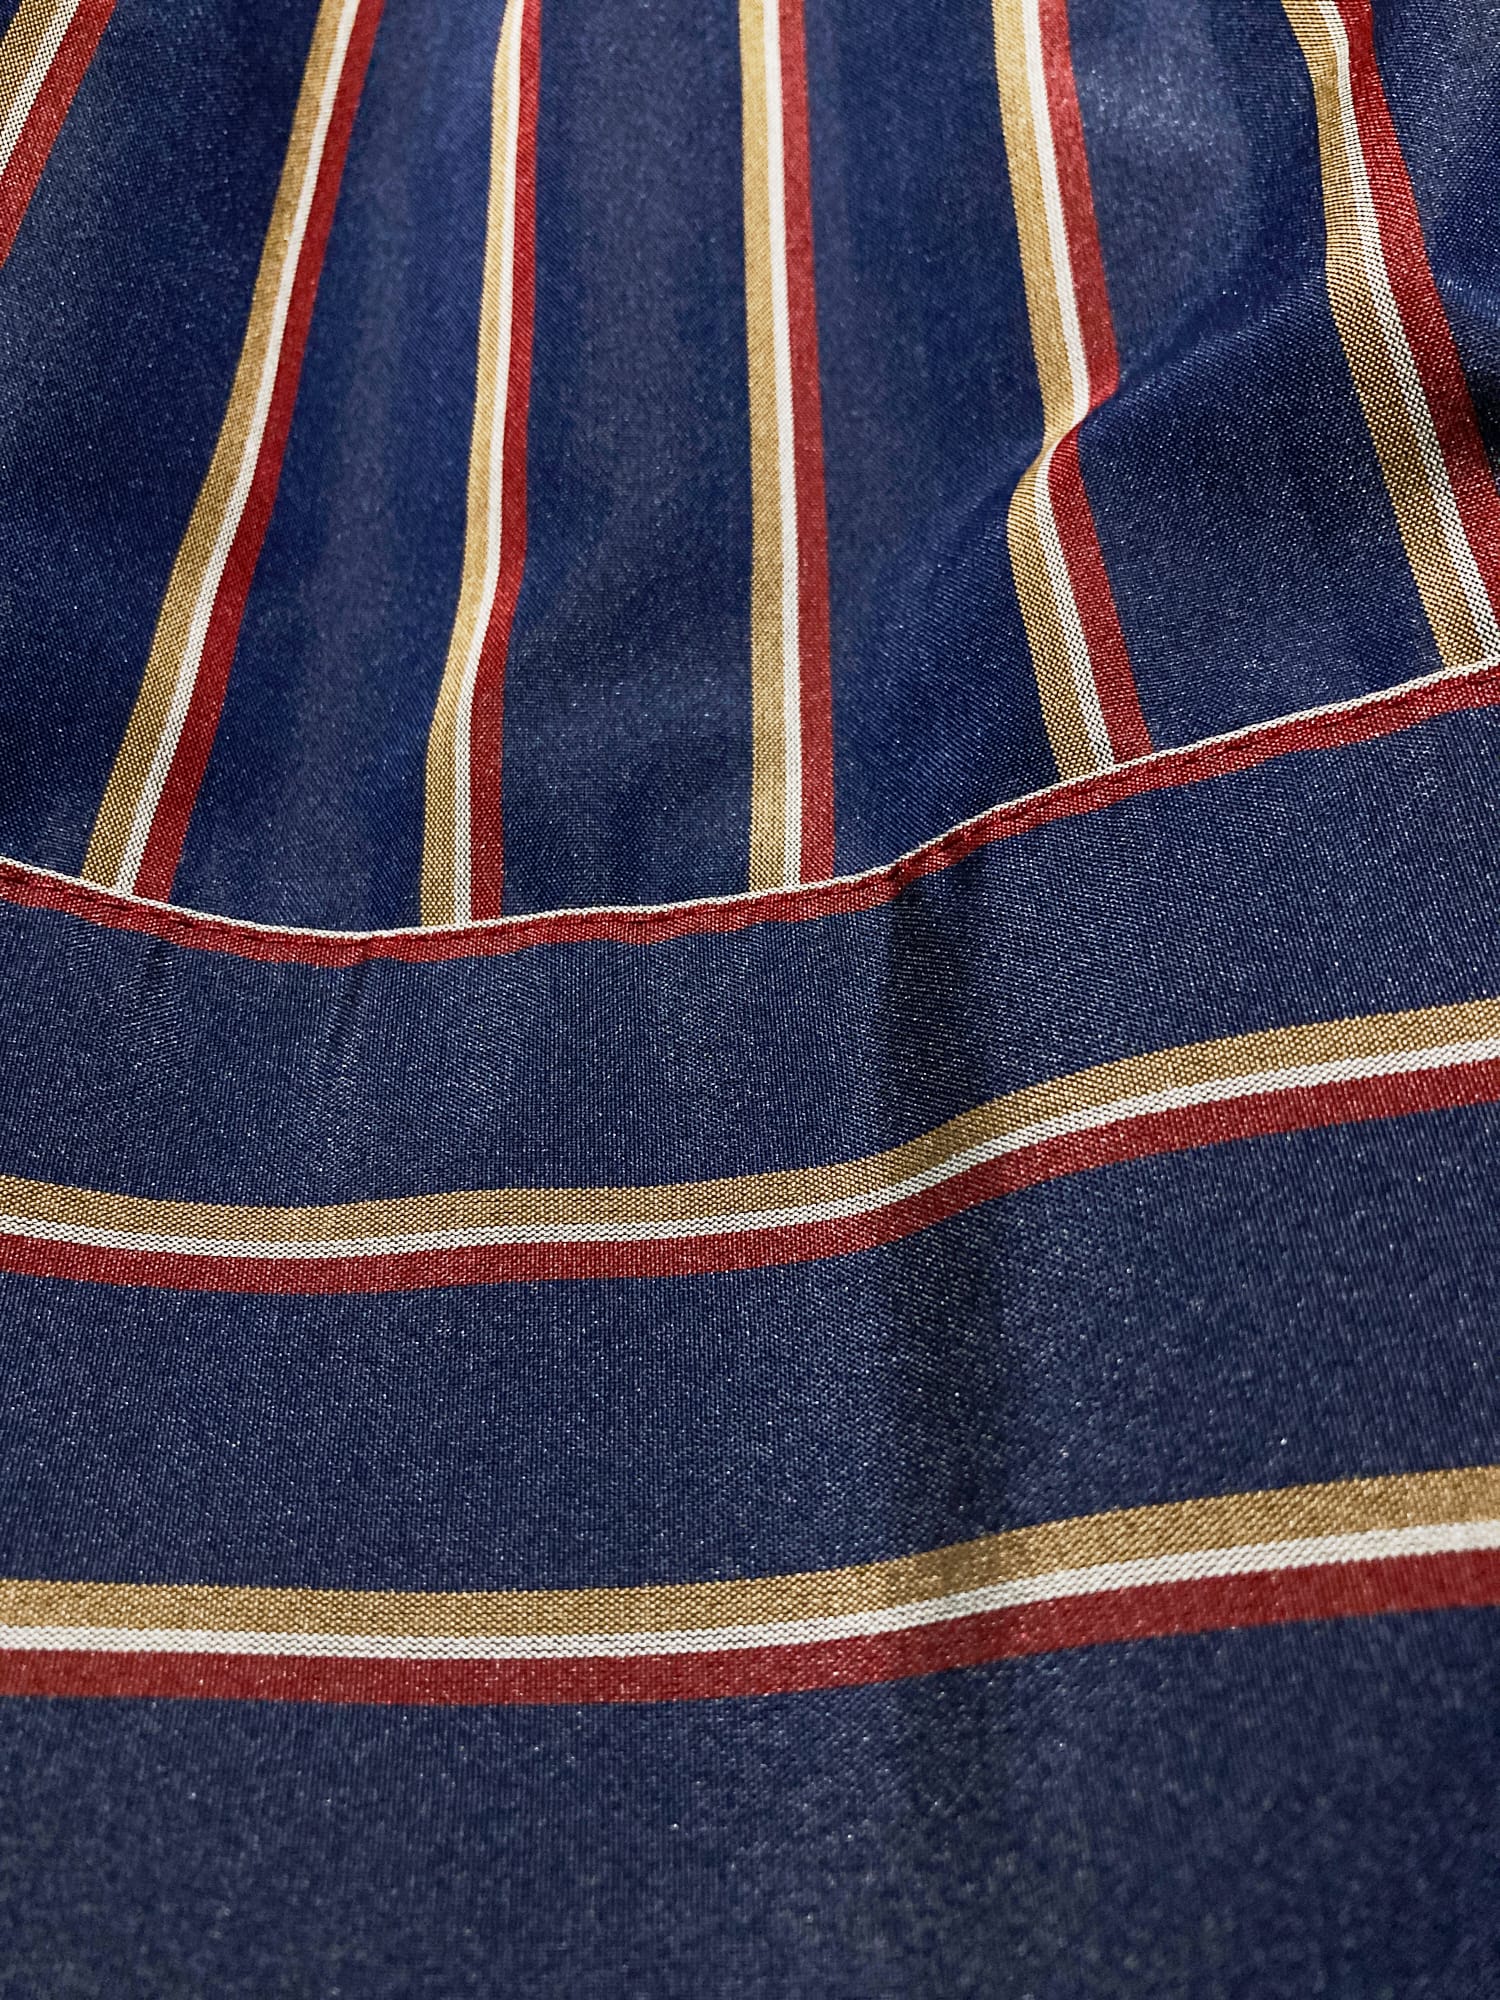 Wrinqle Inoue Pleats navy red yellow striped polyester skirt with pleated waist